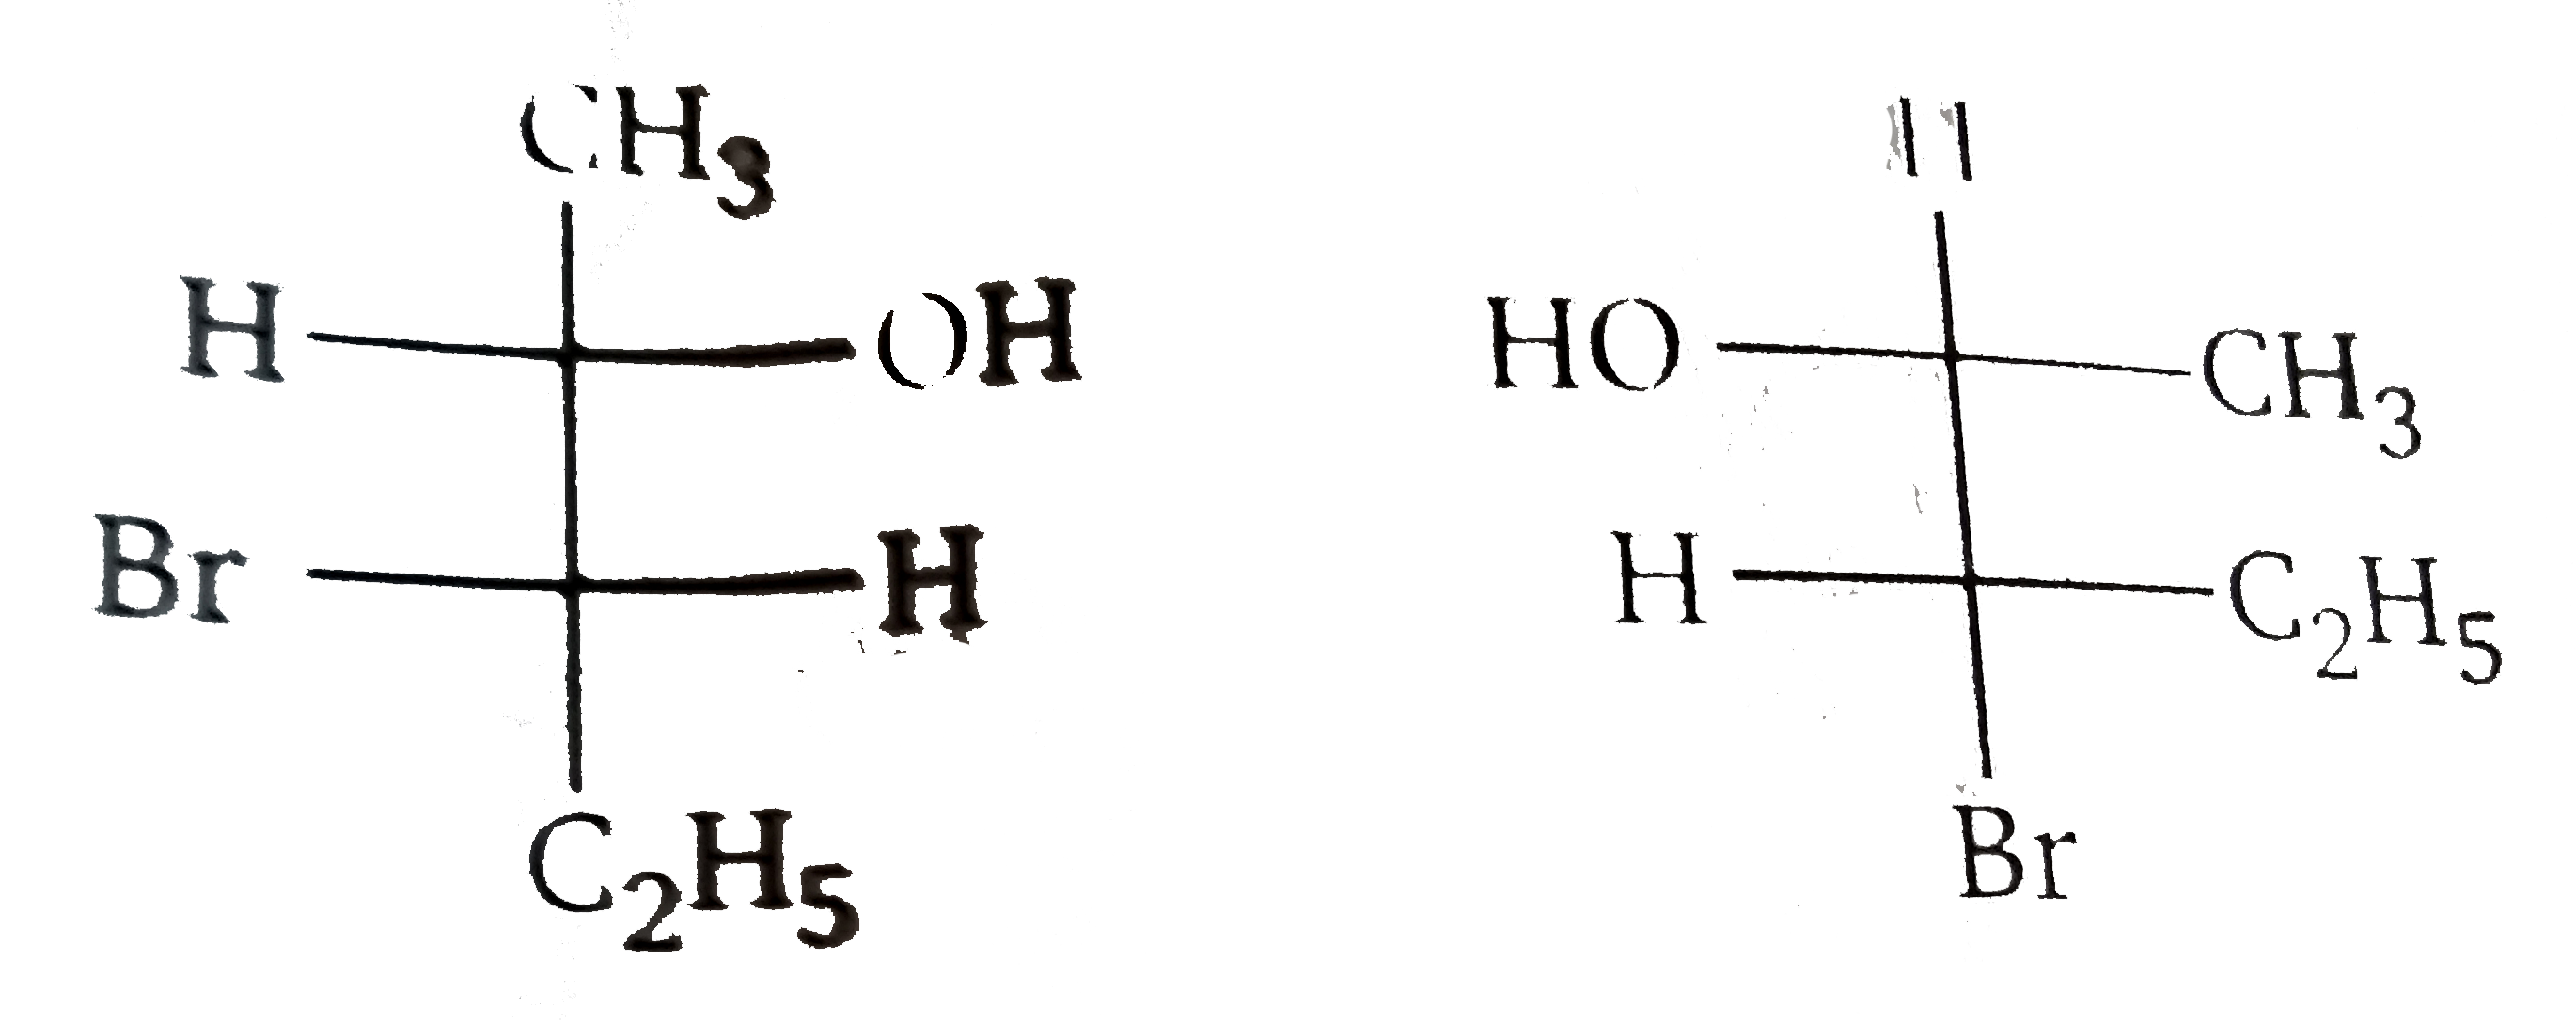 The molecules represented by the above two structures are :